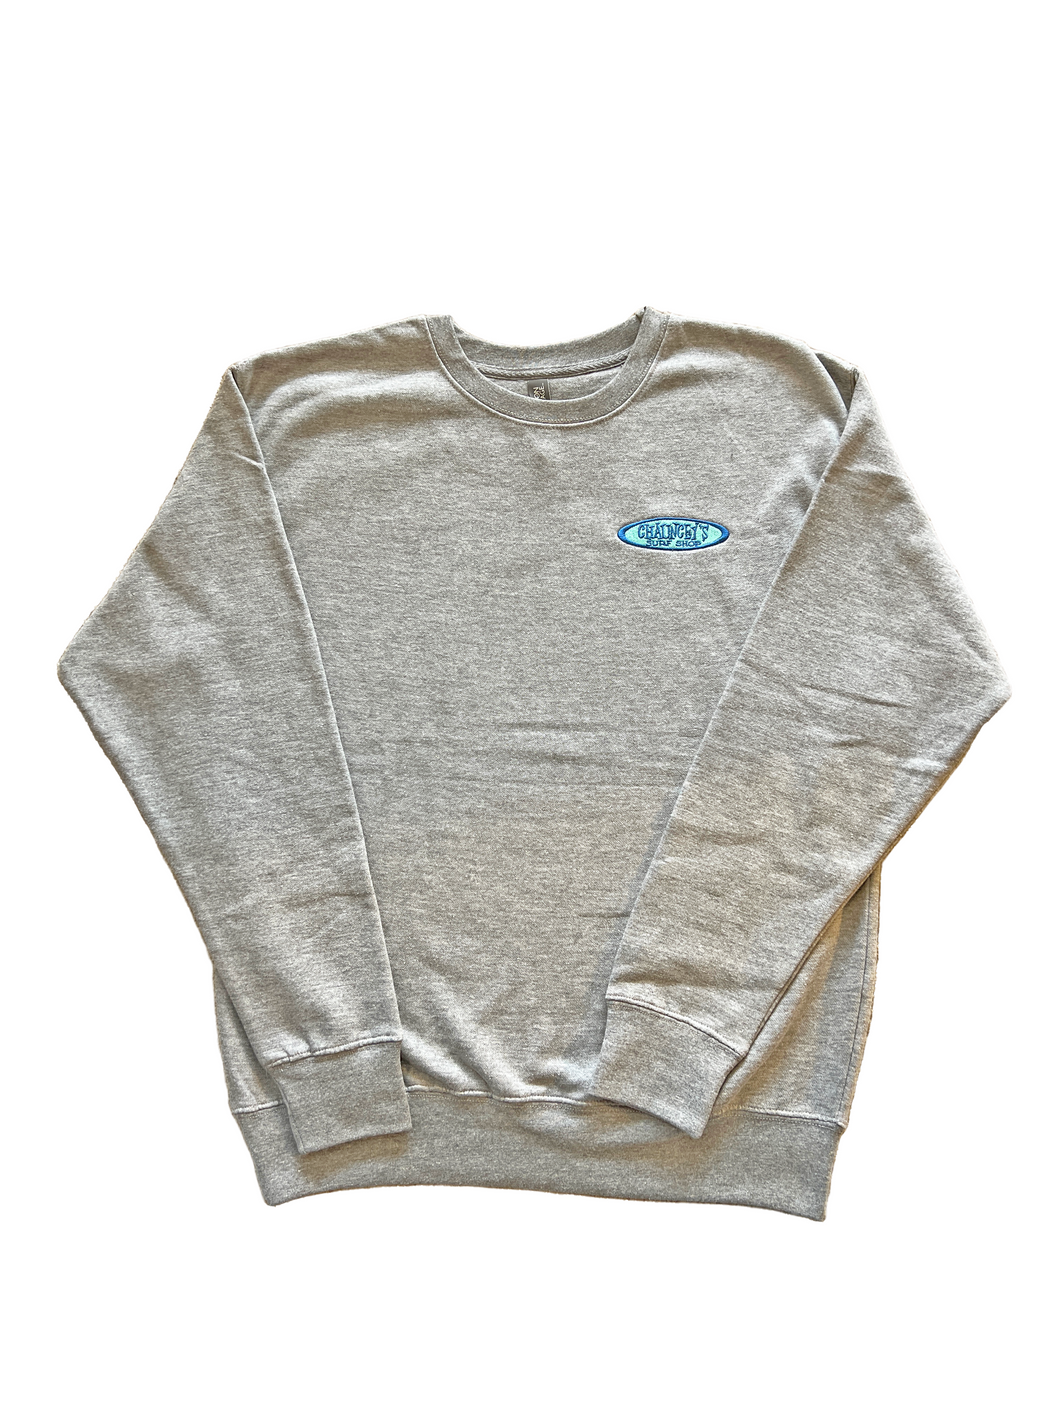 Front view of embroidered crewneck sweatshirt in Carbon Gray